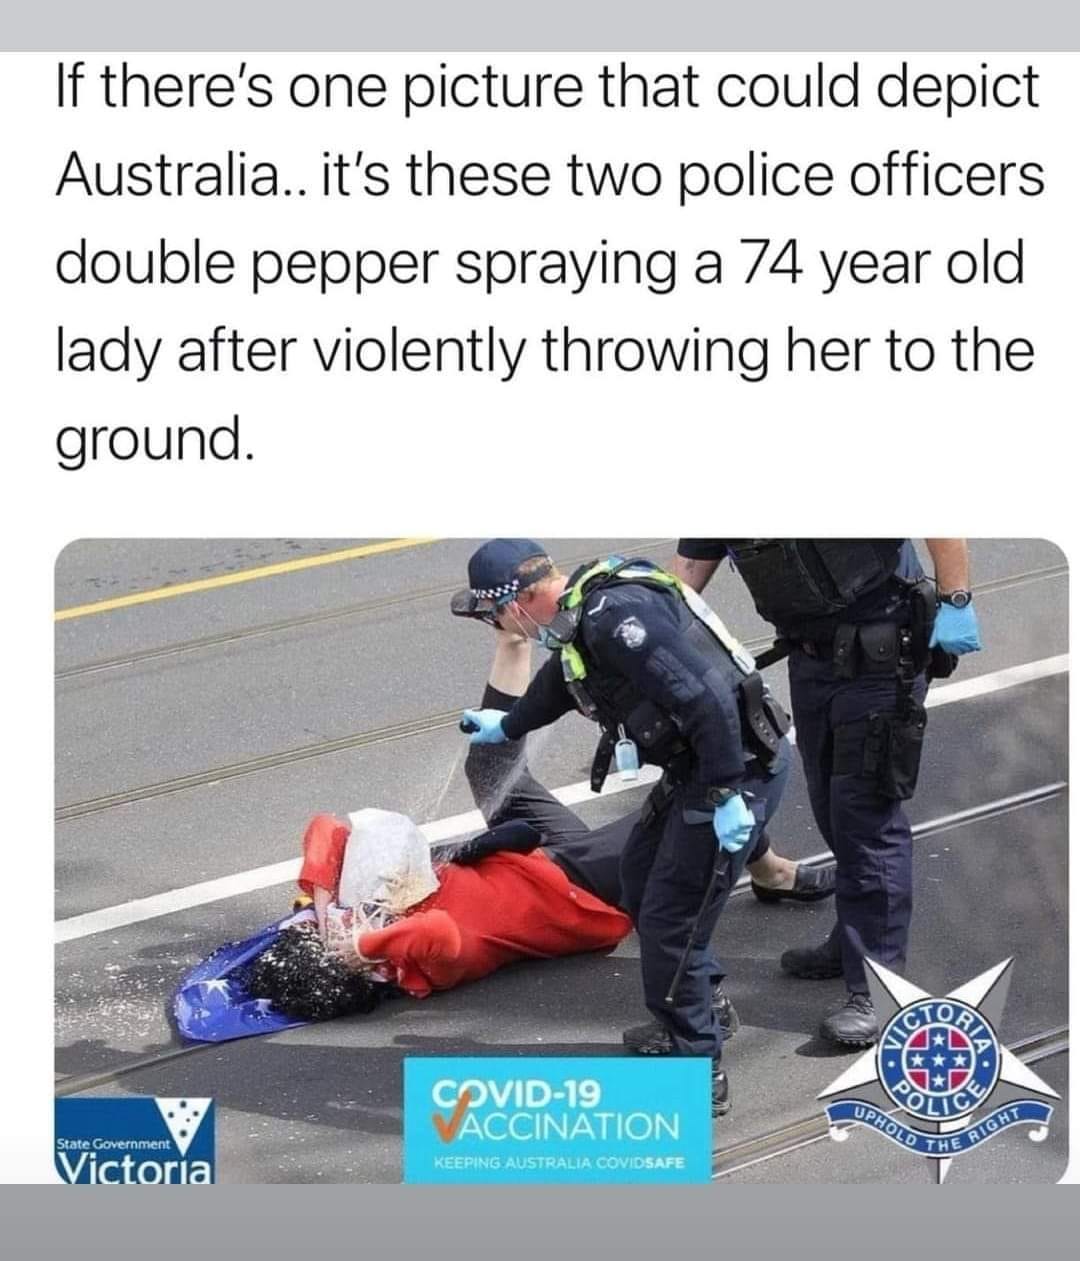 May be an image of 1 person and text that says 'If there's one picture that could depict Australia.. it's these two police officers double pepper spraying a 74 year old lady after violently throwing her to the ground. StateGoverment State Victoria COVID-19 VID-19 ACCINATION KEEPINGU. AUSTRALIA COVIDSAFE AICTOALA UPHOLO THE RIGHT O'